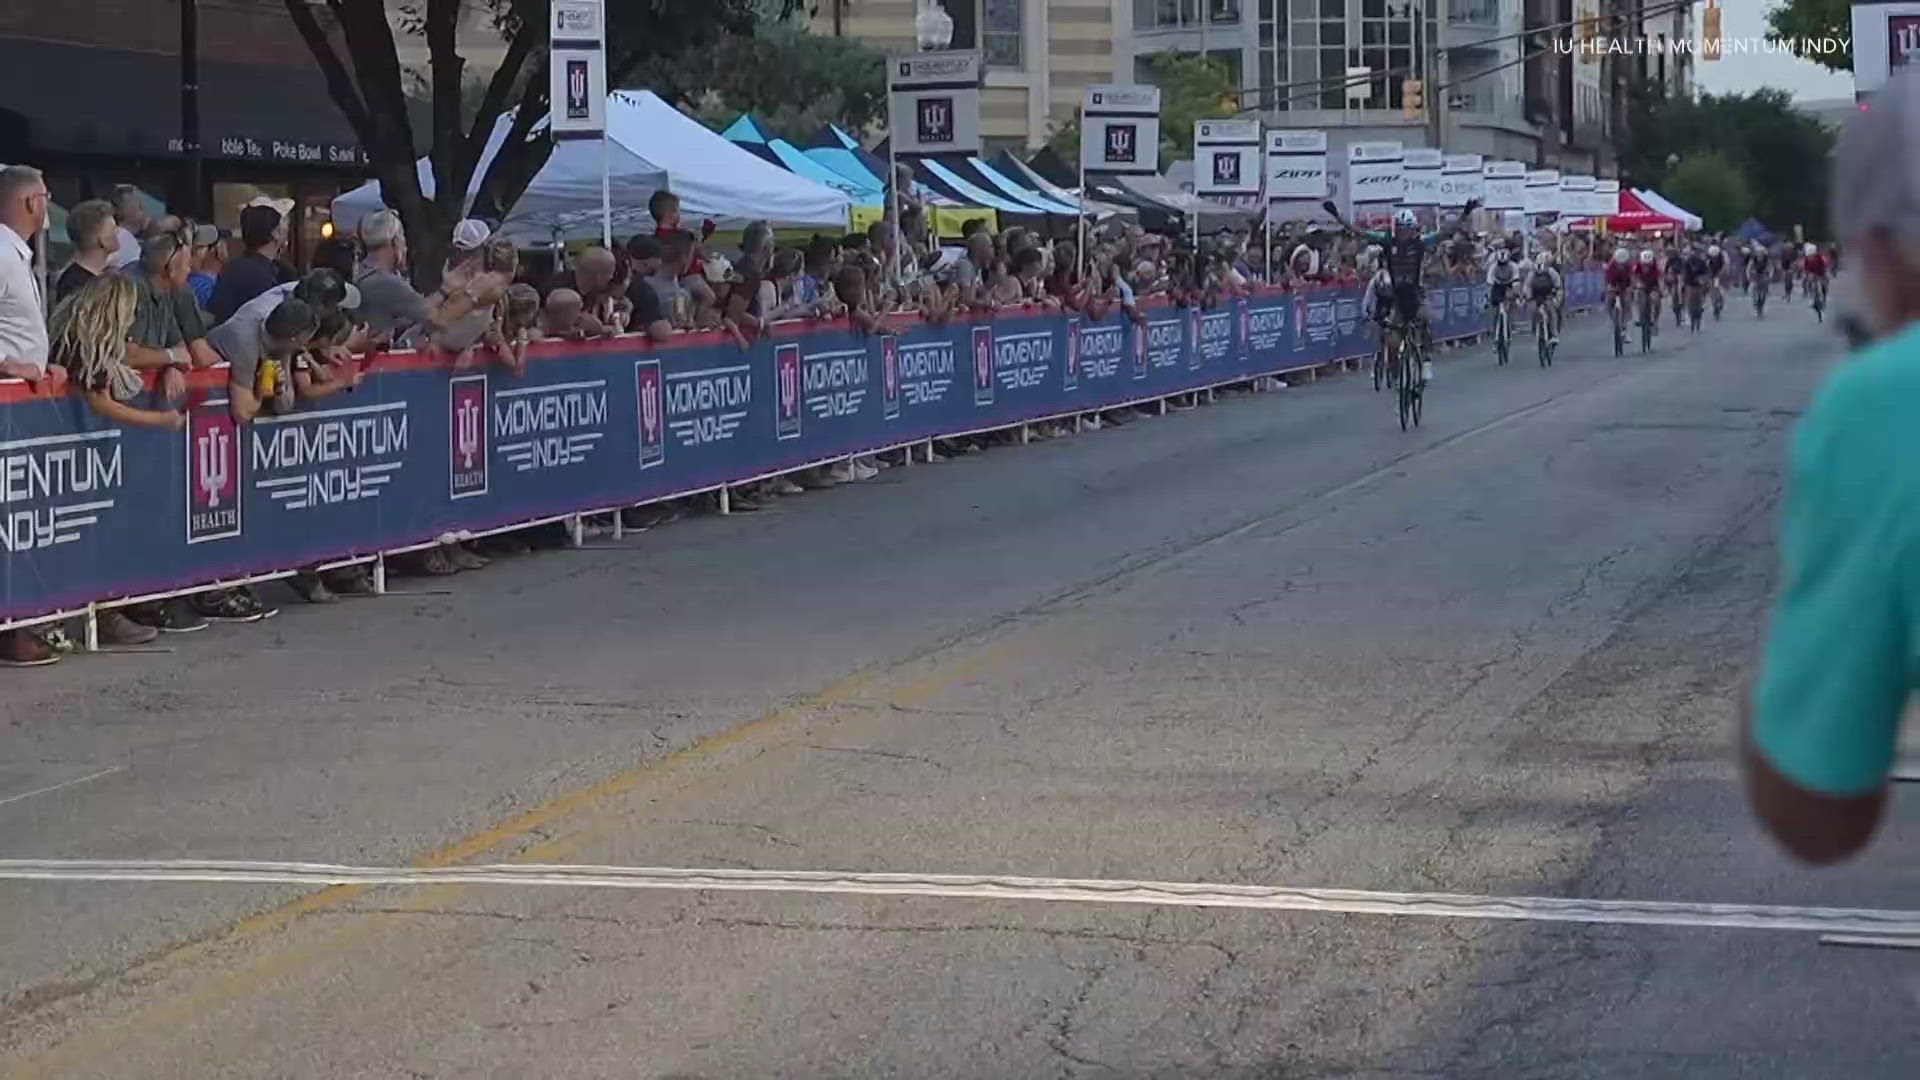 The race is a a part of the American Criterium Cup Series.